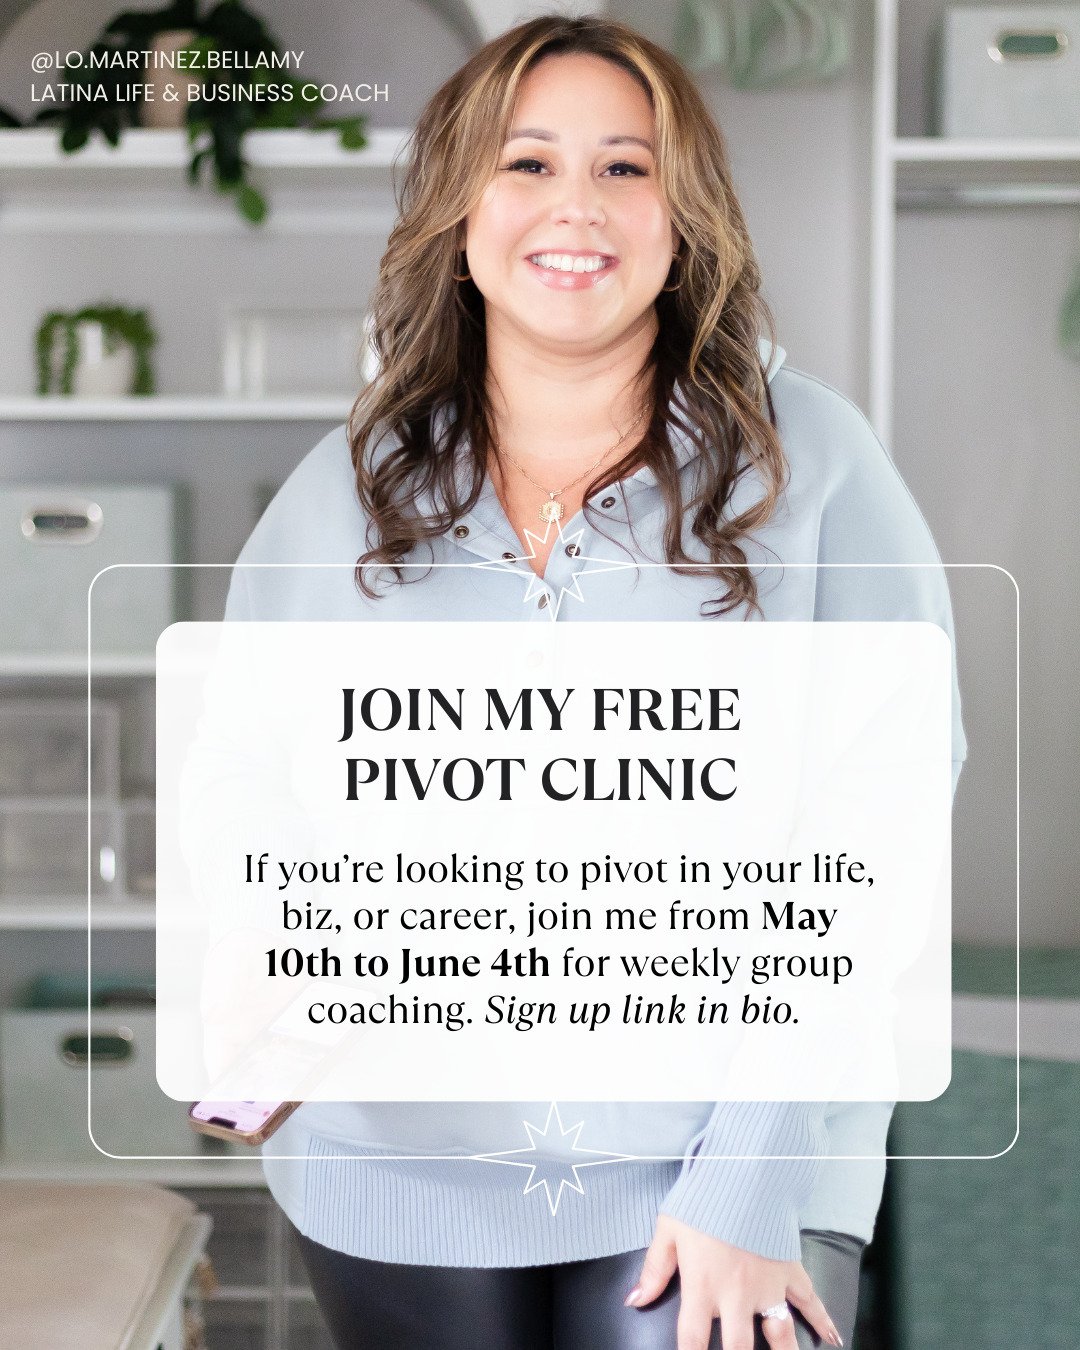 It's almost time!! Pivot Clinic kicks off Fri., 5/10 @ NOON eastern.

Free registration via link in bio @lo.martinez.bellamy or dm with any questions!

Share with your peeps!! I&rsquo;d love to meet them too. 

See you on Friday ❤️

#lifecoachforwome